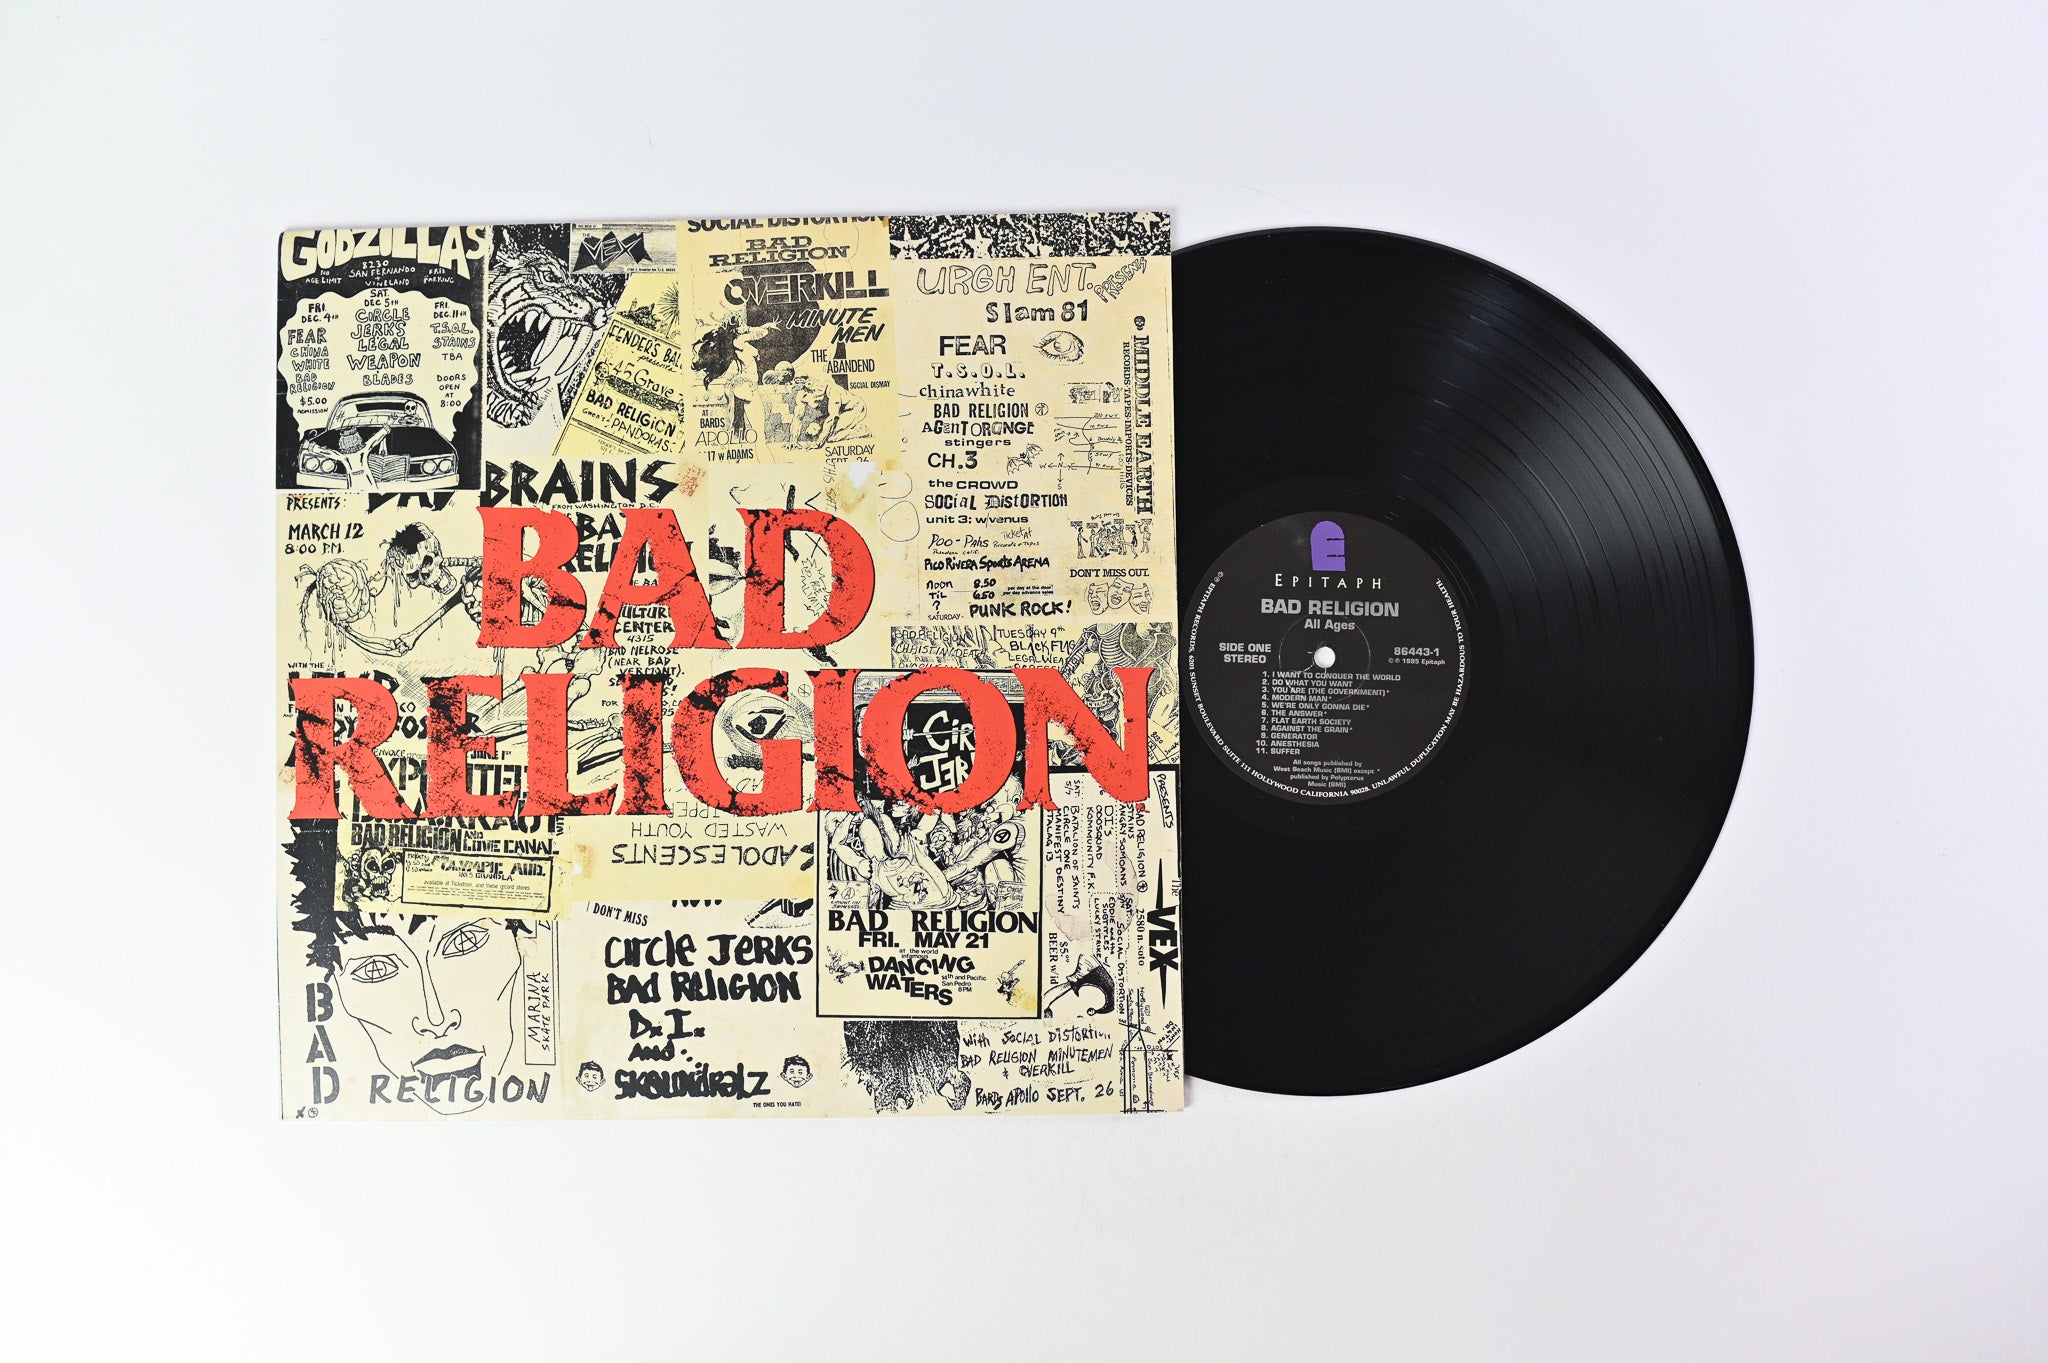 Bad Religion - All Ages on Epitaph